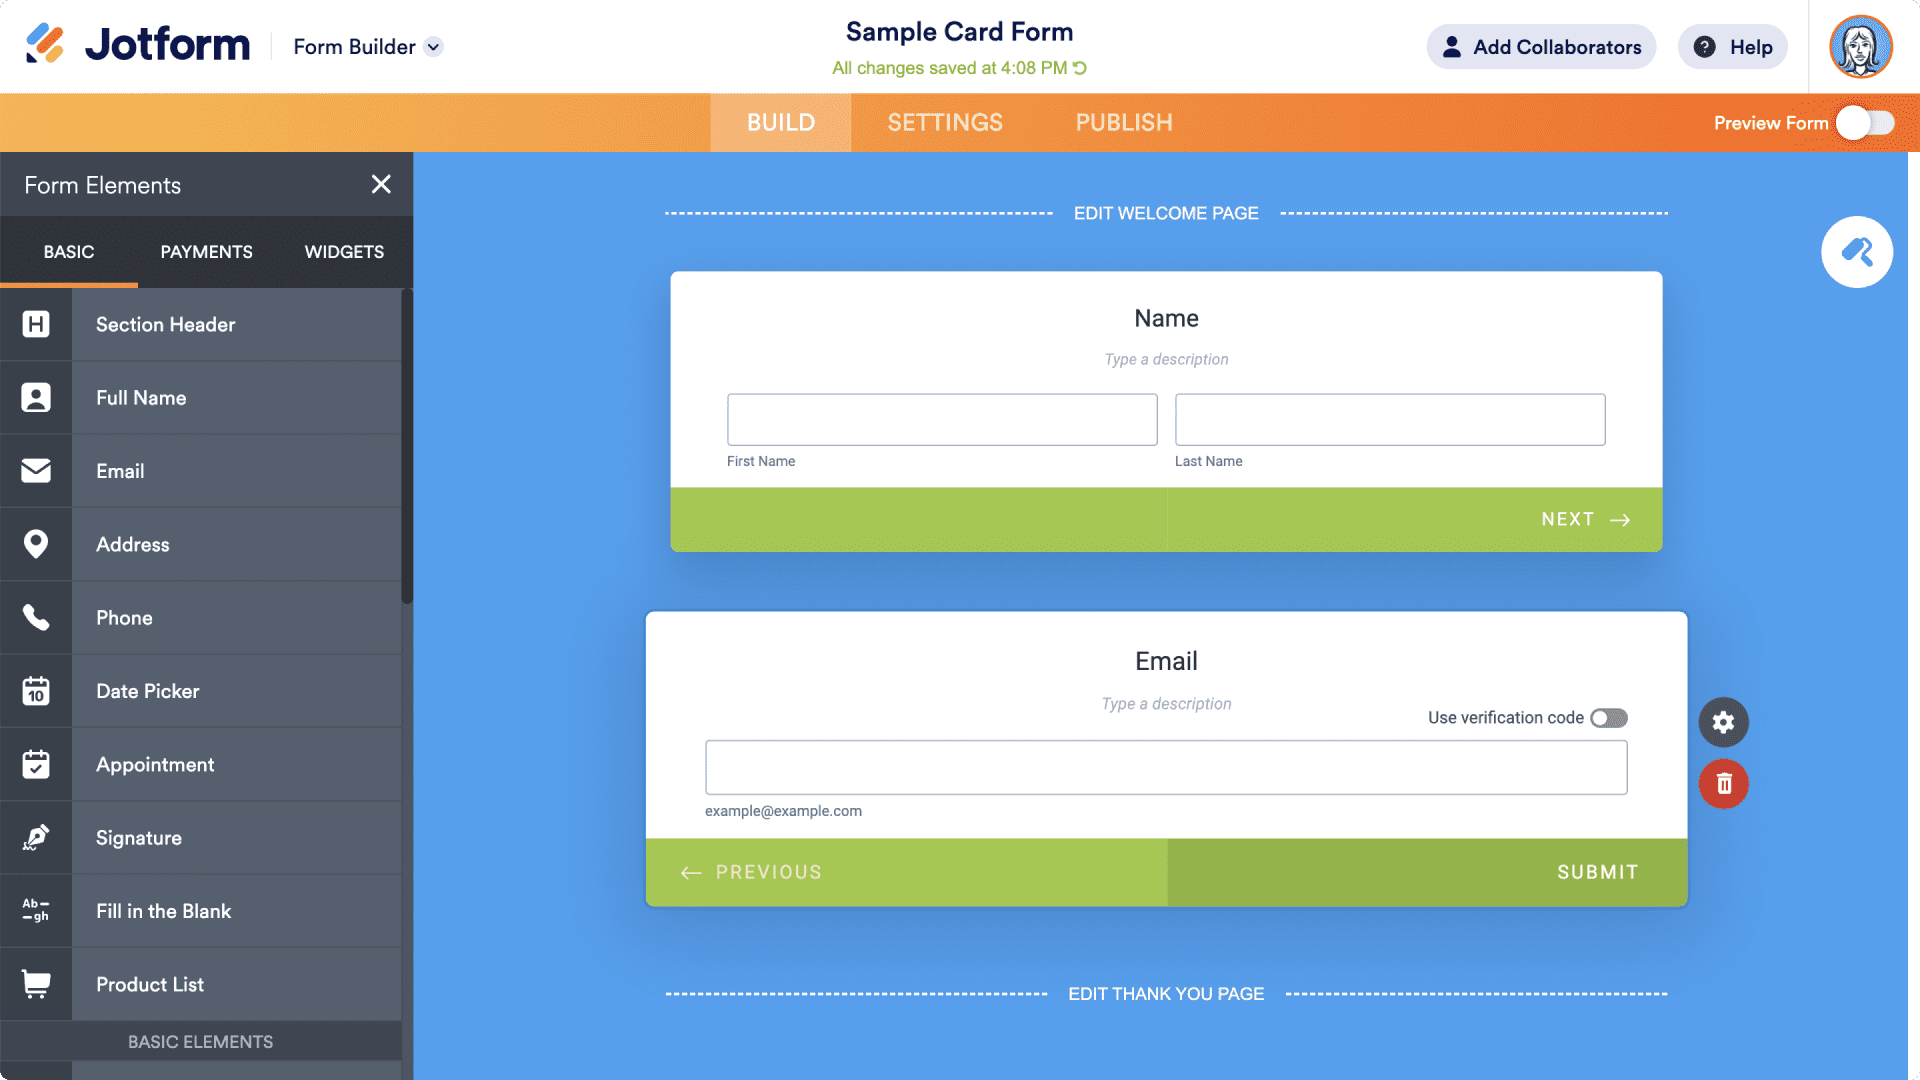 Here’s what your form will look like in the Form Builder after you’ve added the form elements. 